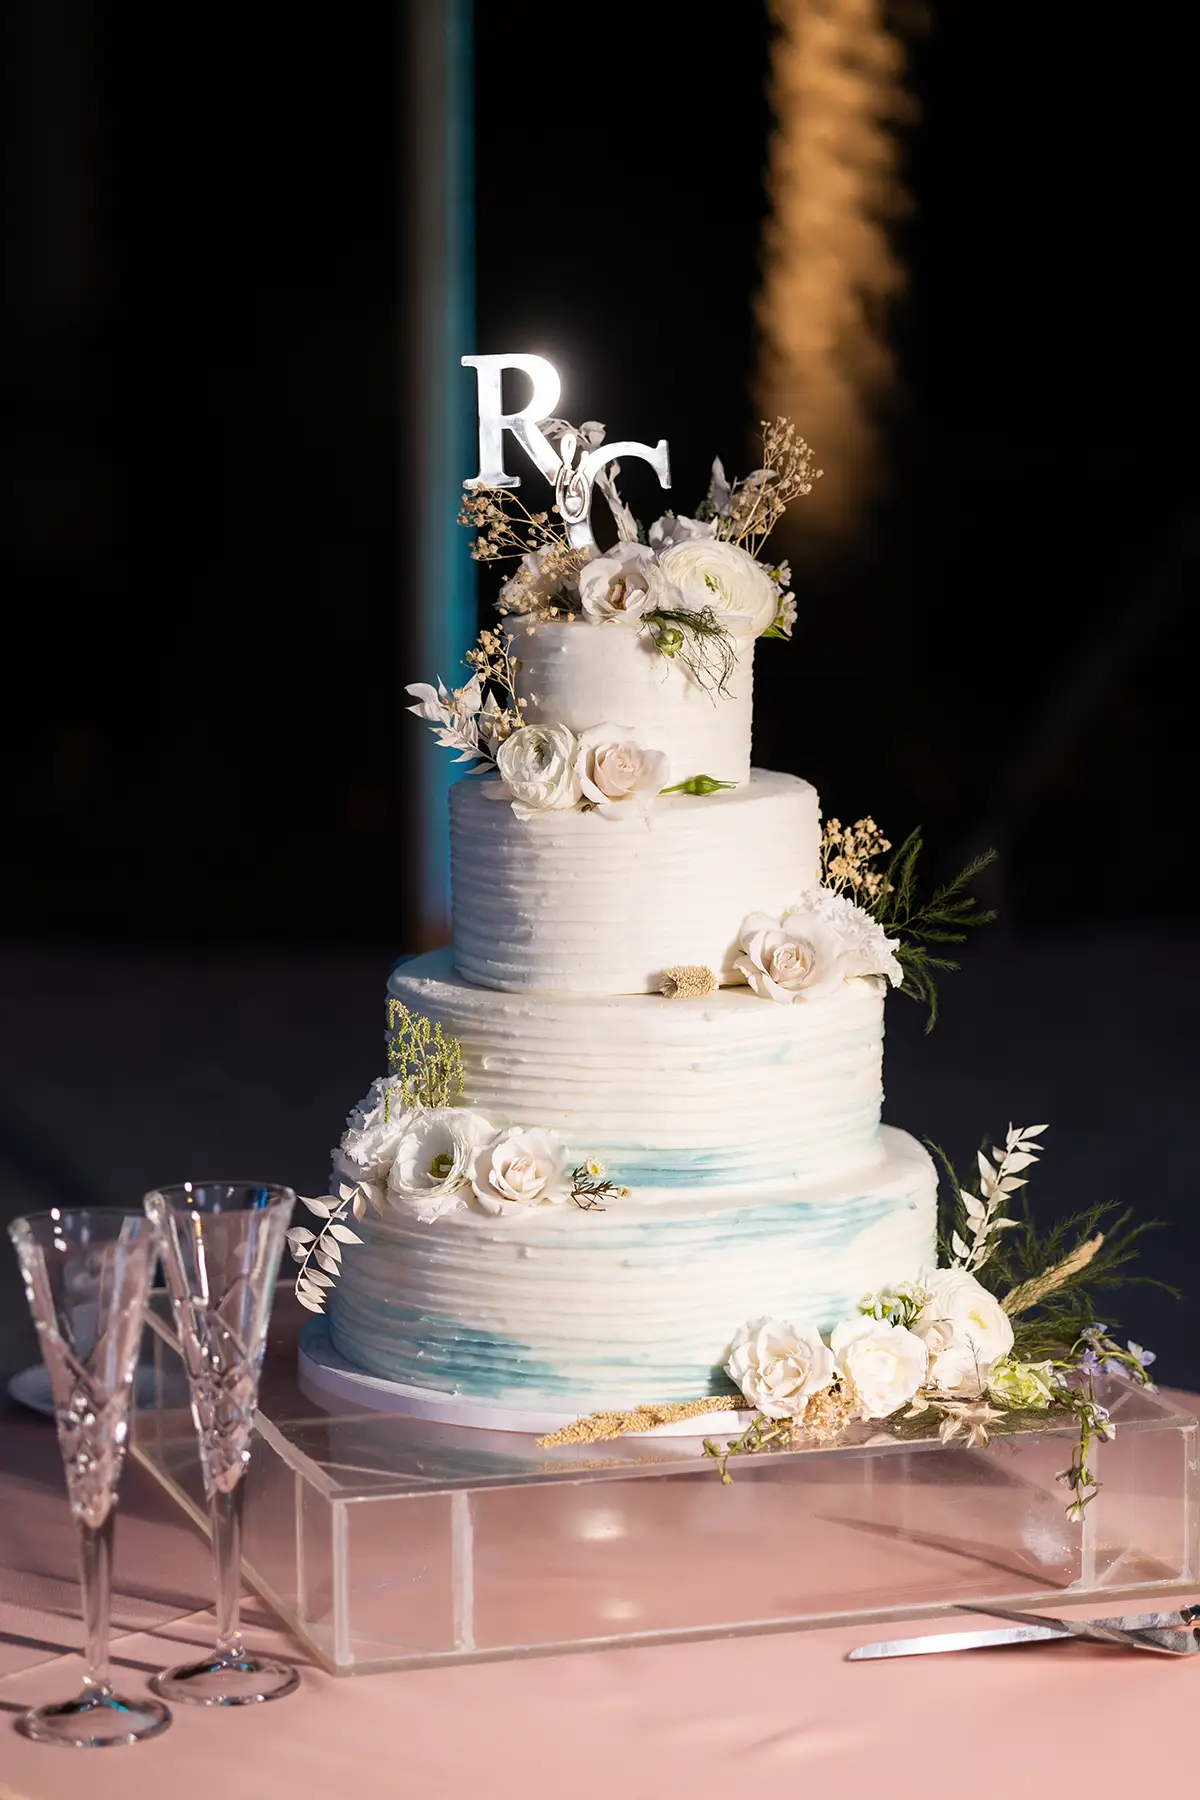 silver initials R and C on top of four-layer wedding cake with white and aqua blue frosting and white roses